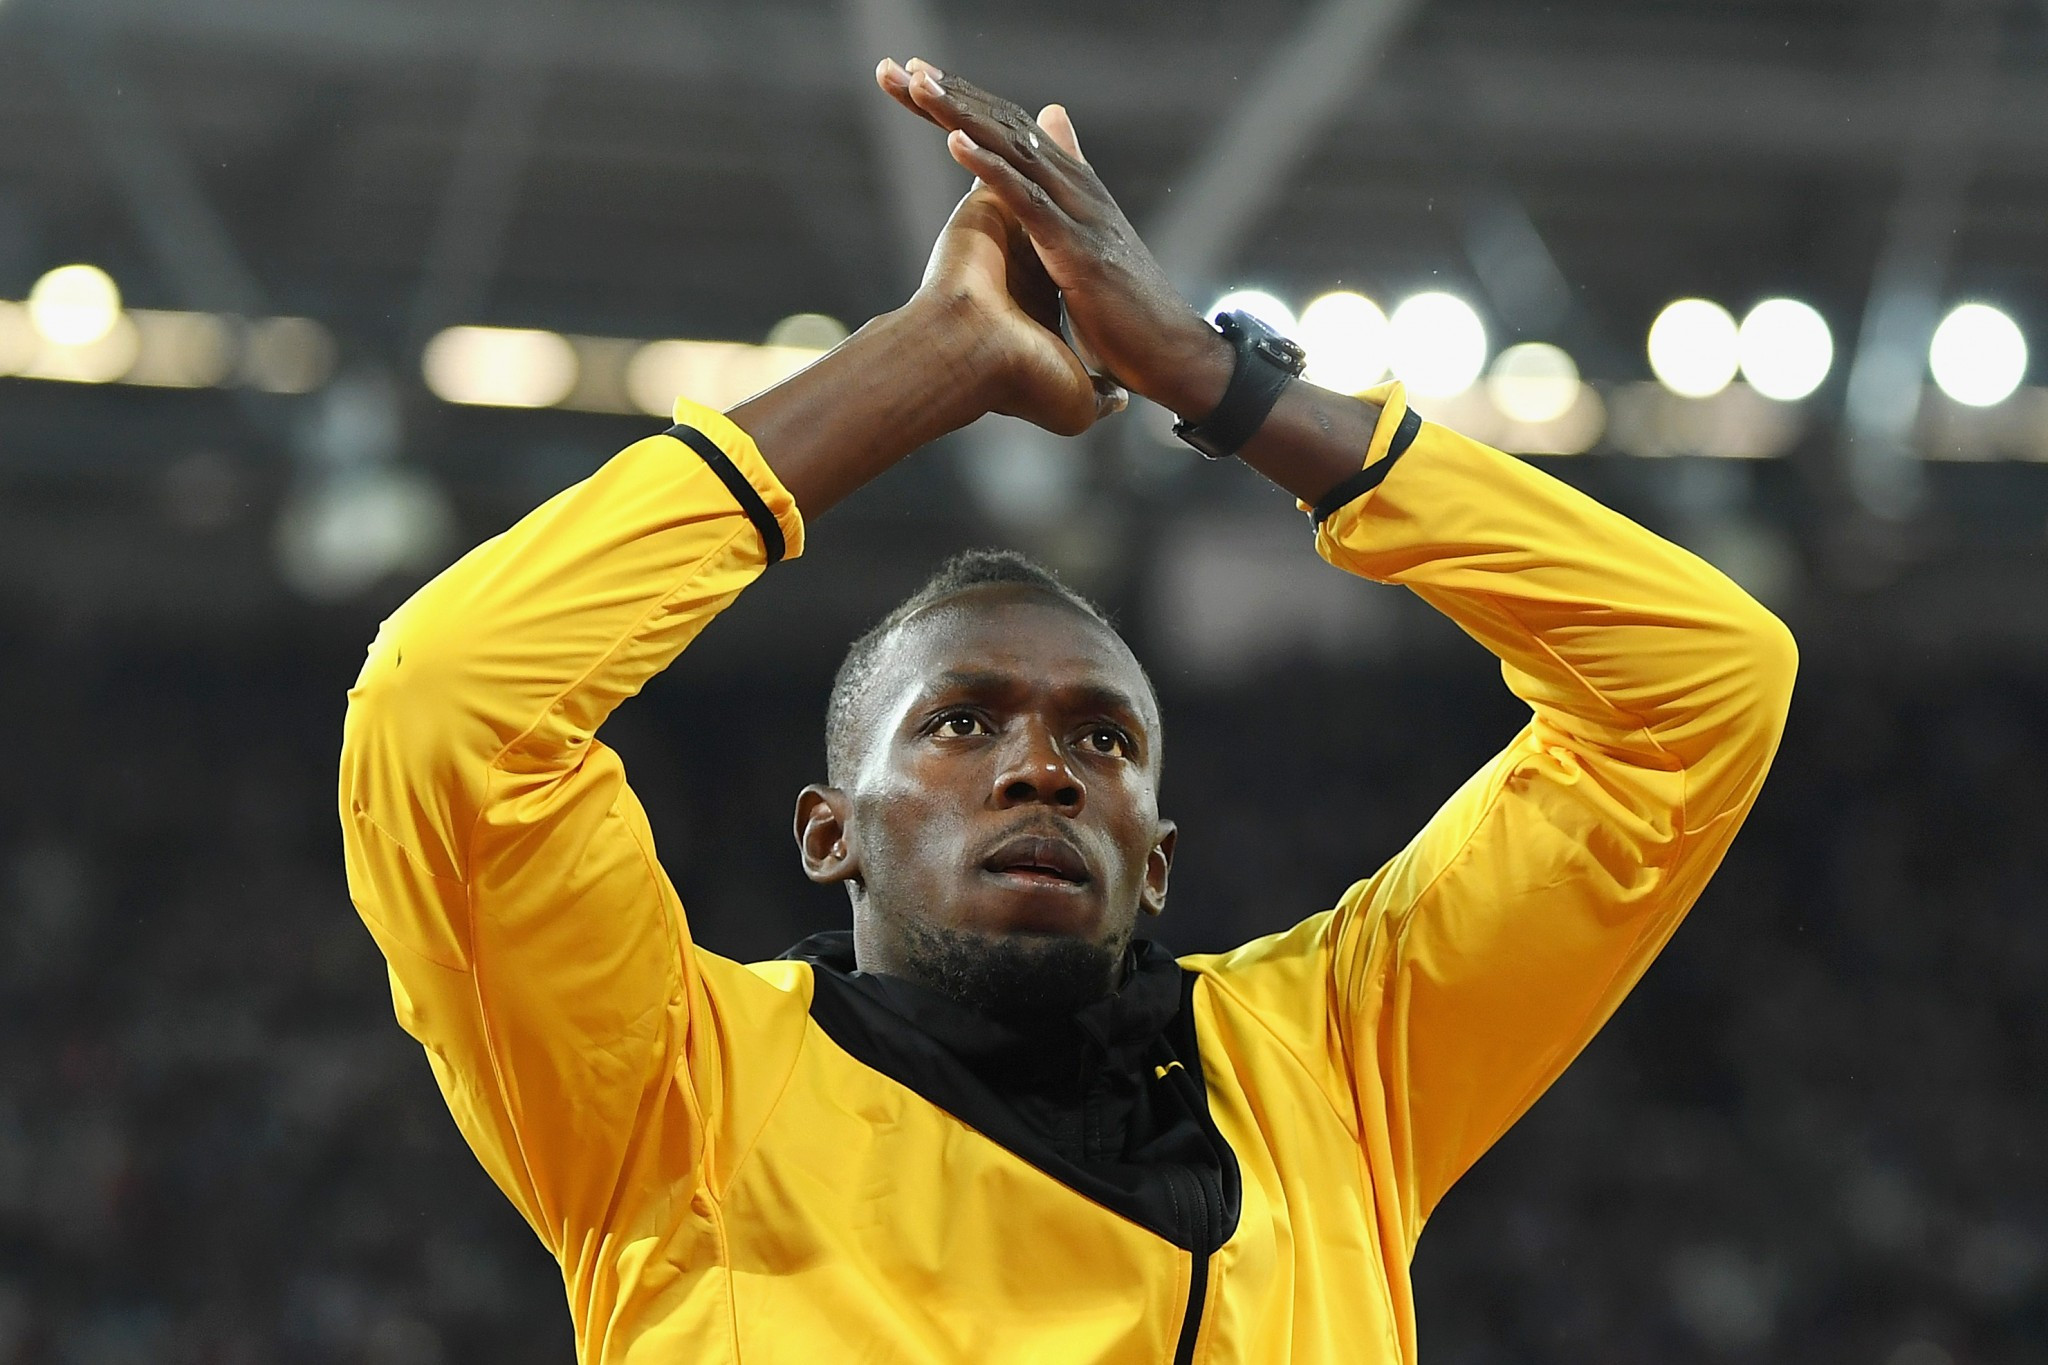 Usain Bolt went into retirement without the golden finish he wanted, but will still be considered an athletics legend ©Getty Images